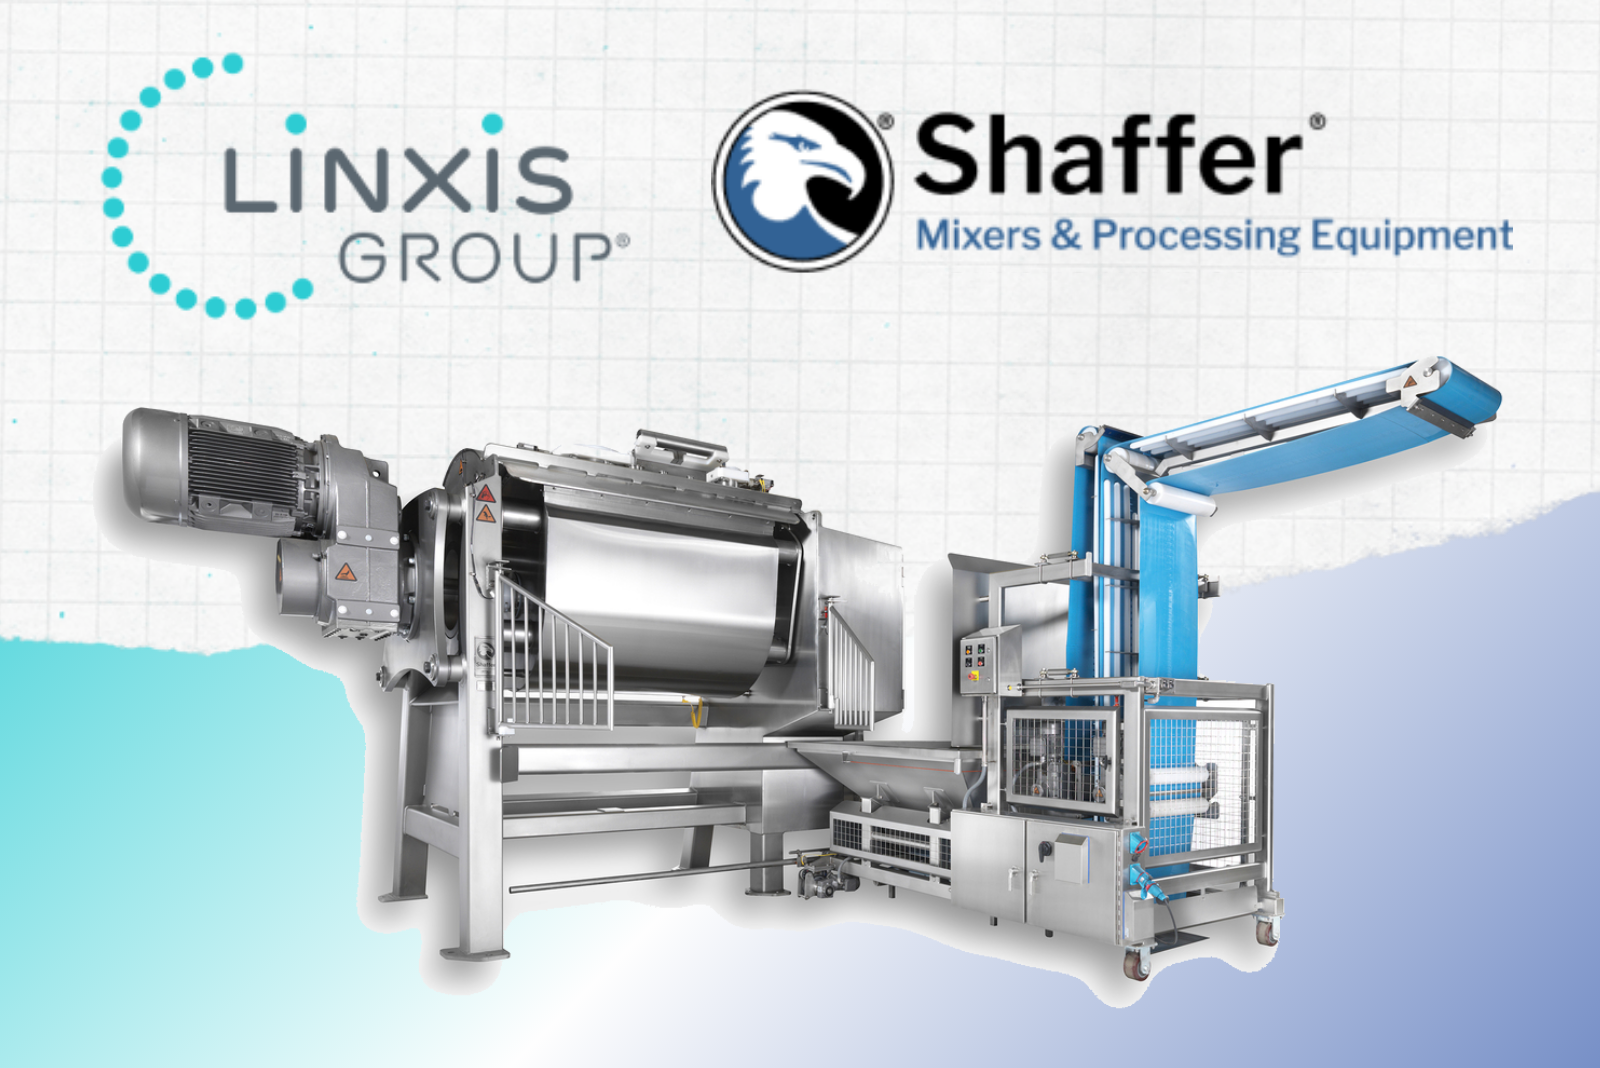 Linxis Group acquires Shaffer from Bundy Baking Solutions - Commercial ...